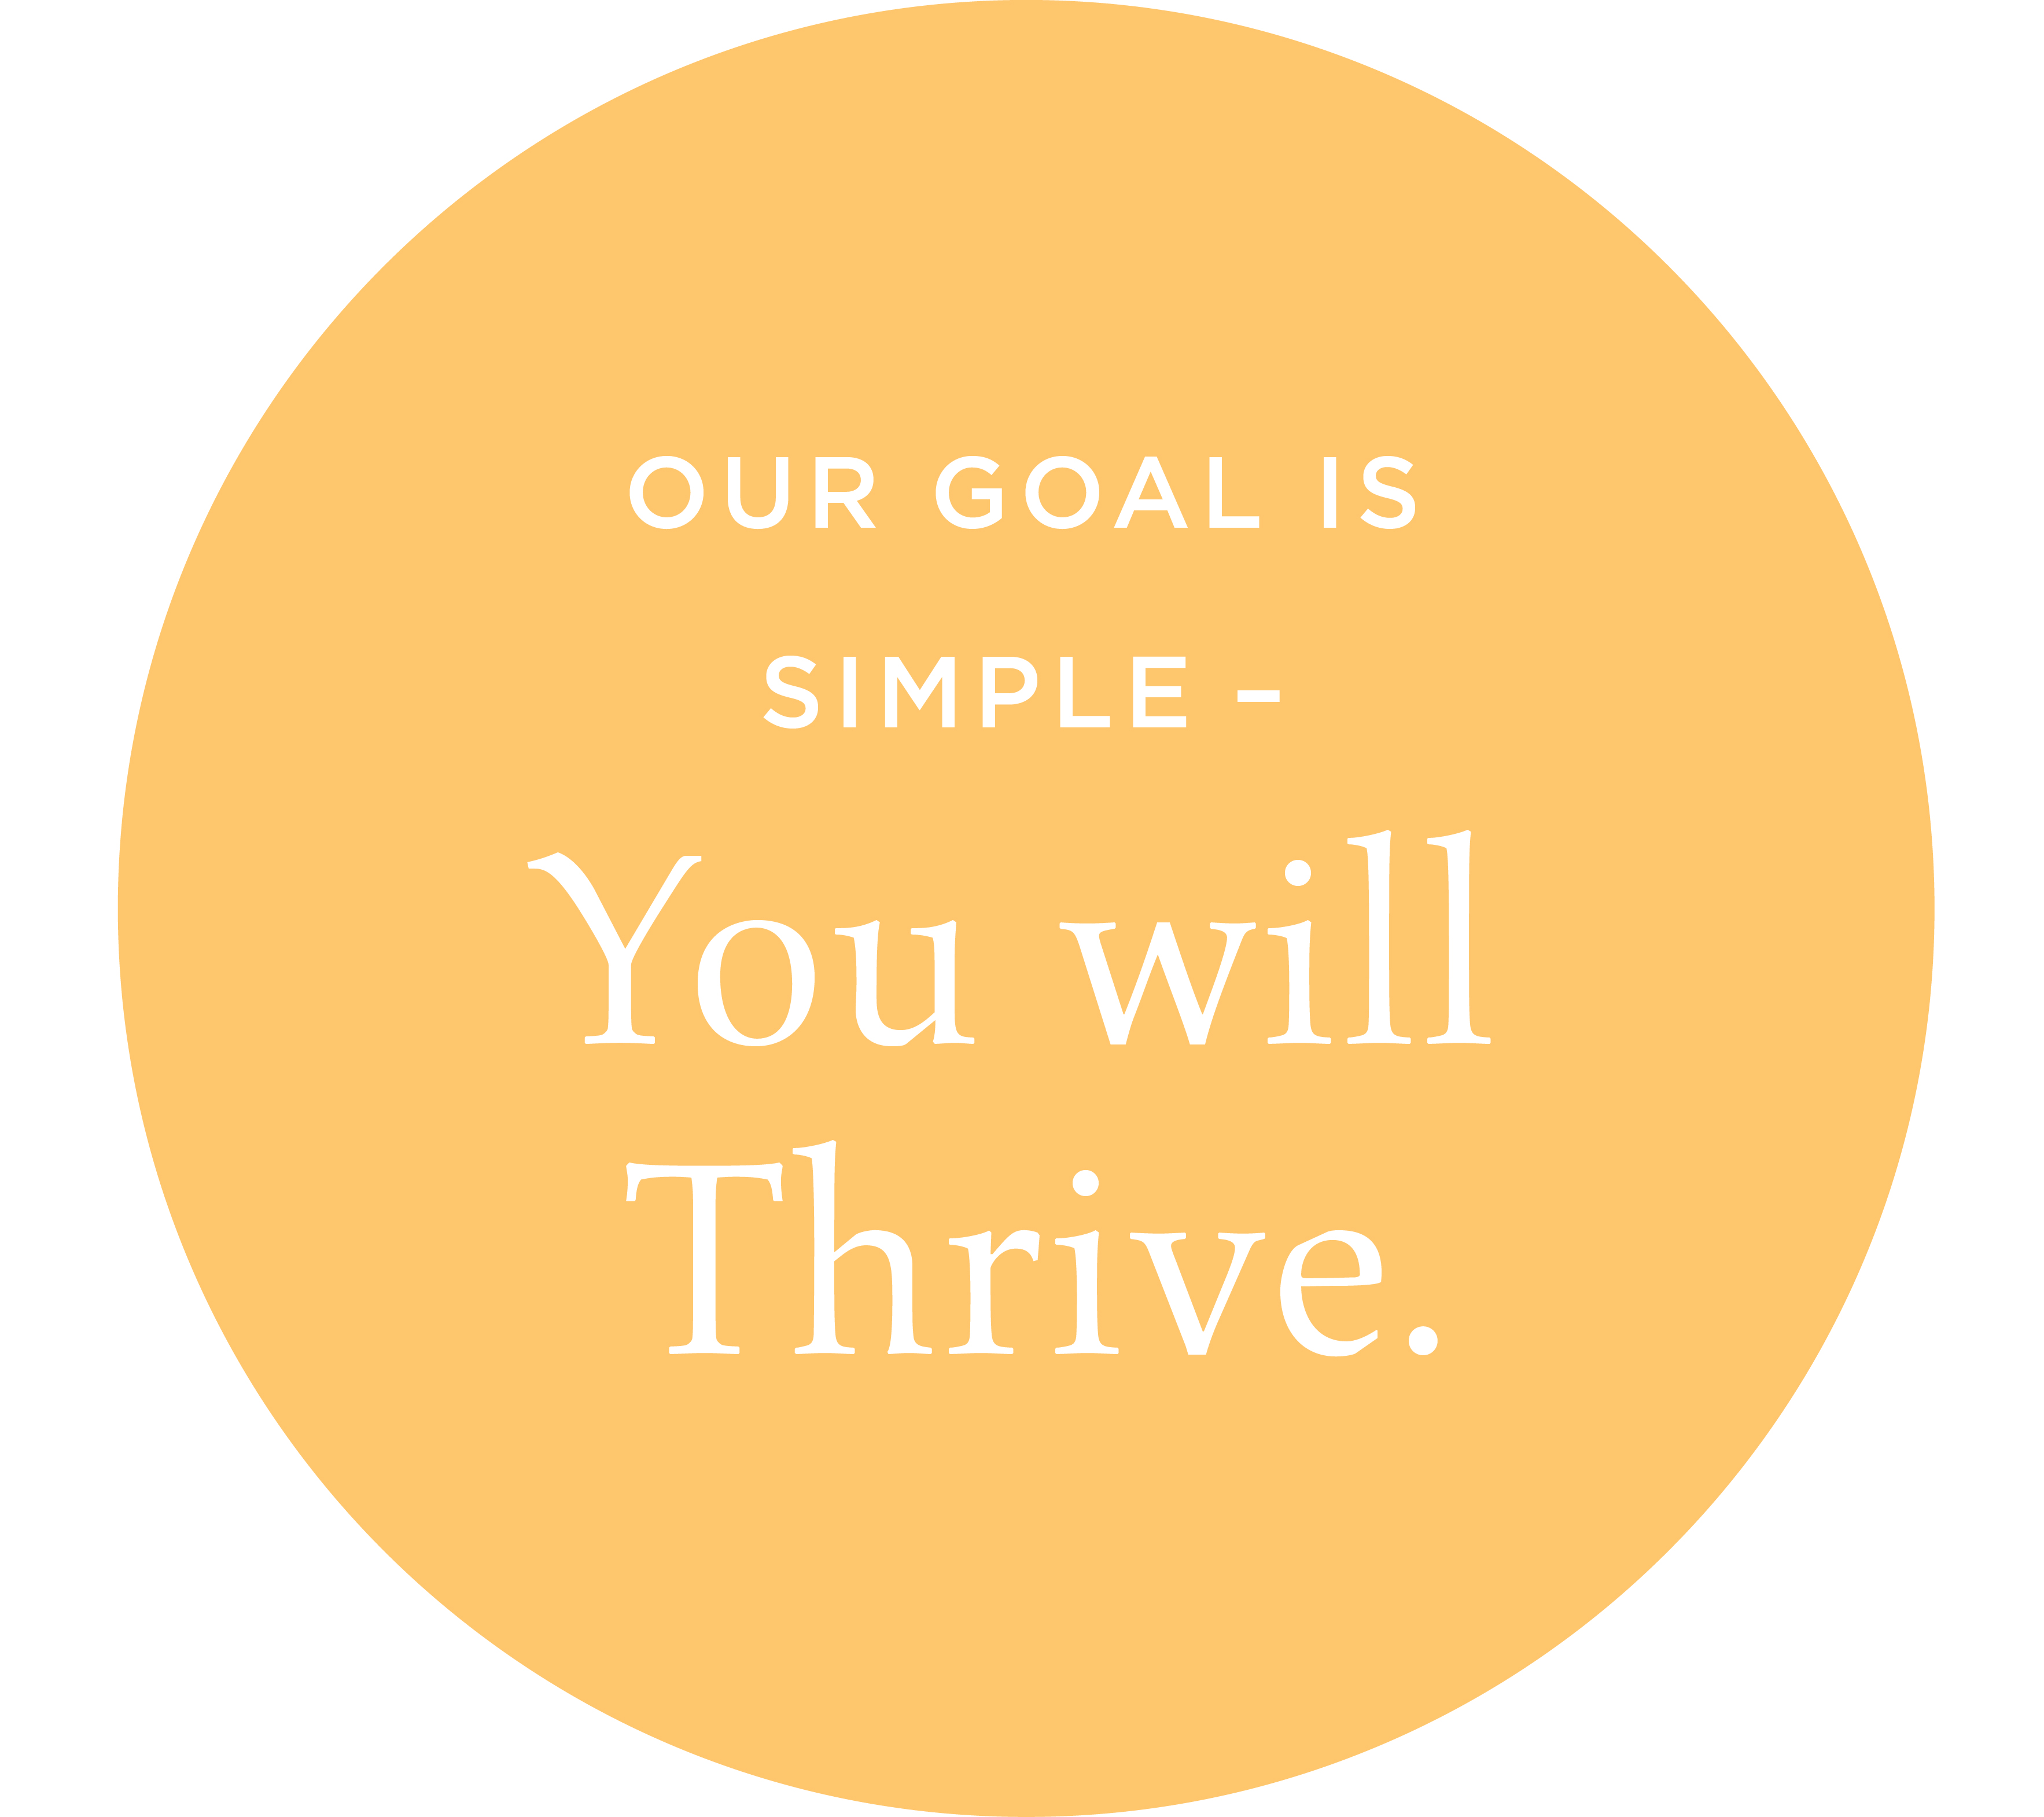 Our goal is simple - You will Thrive.